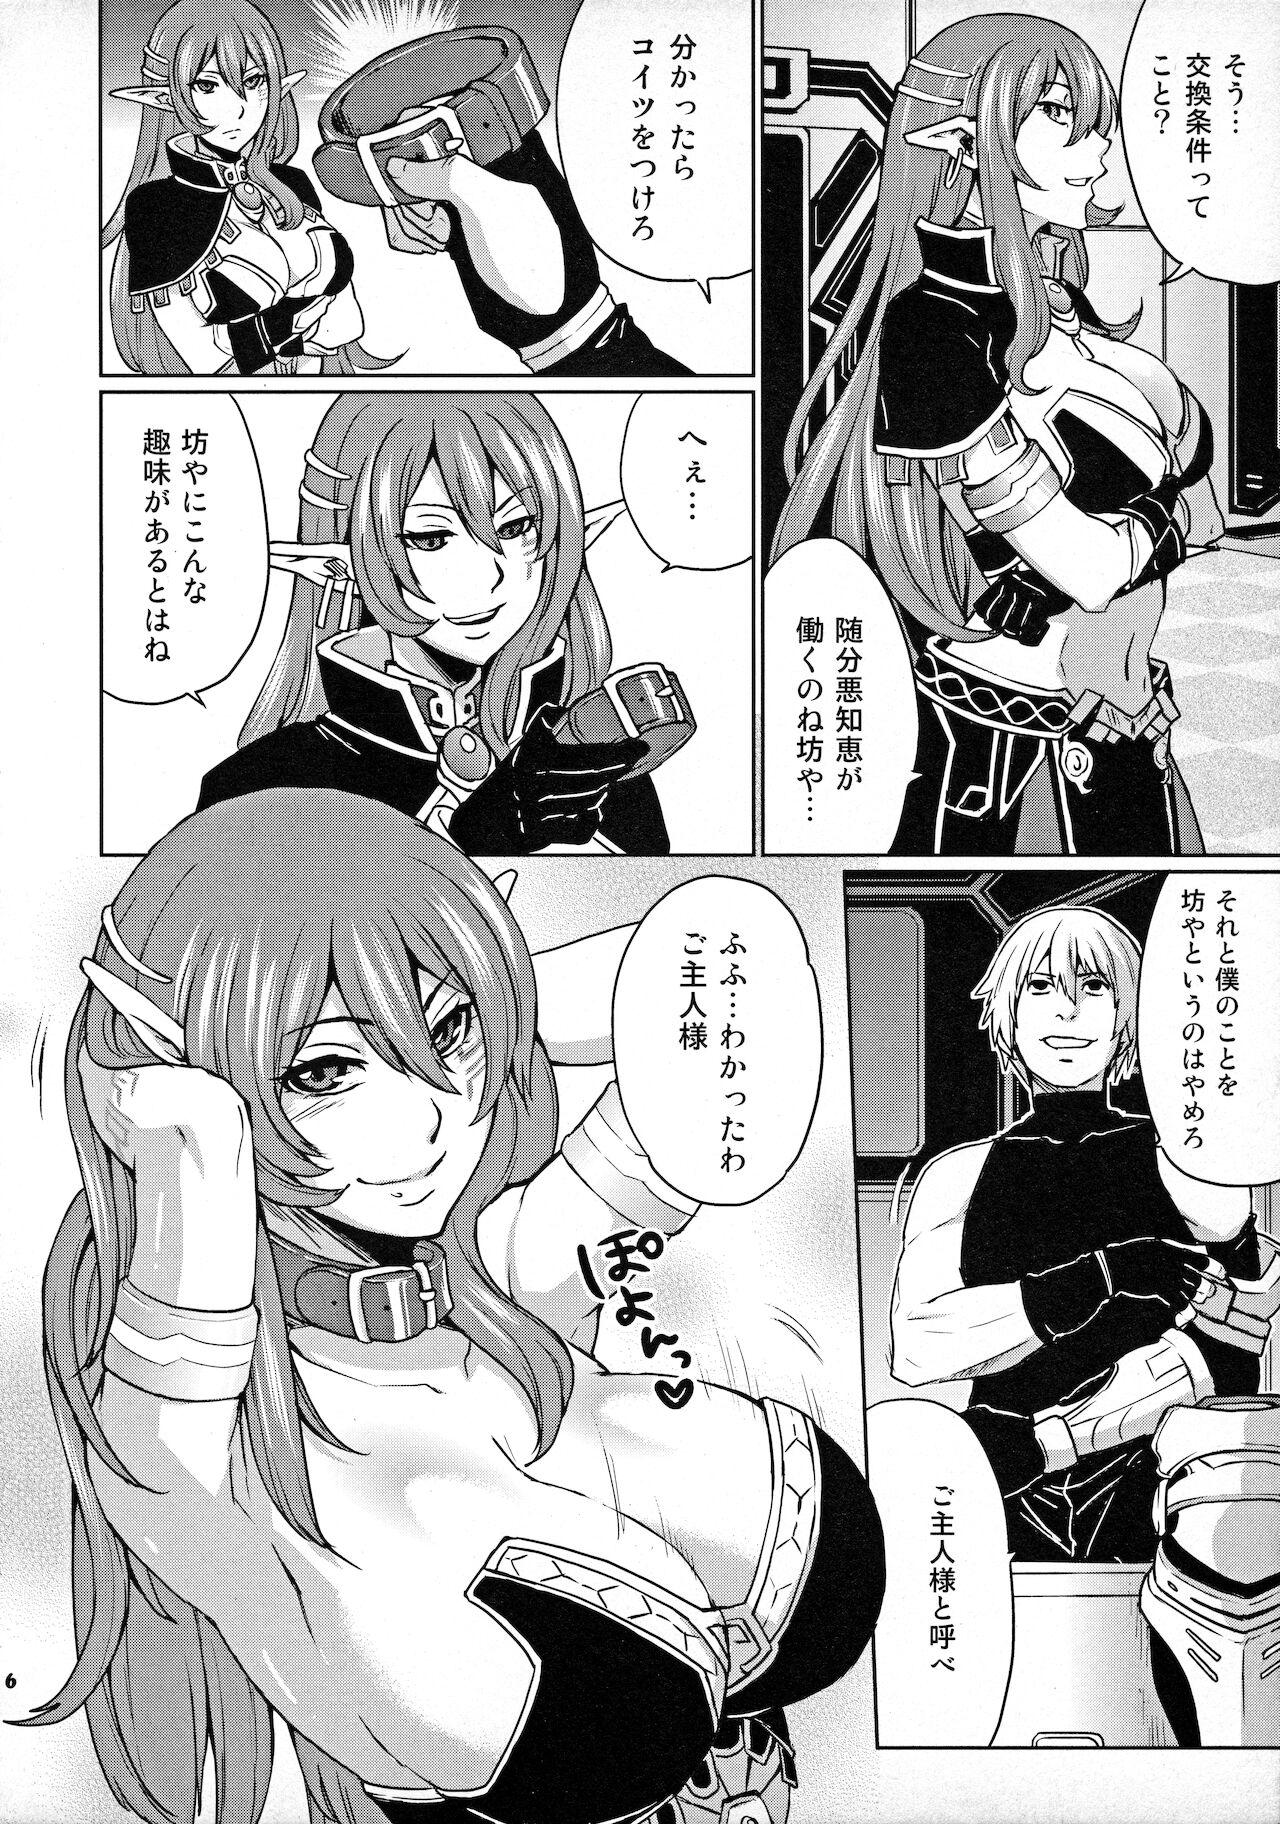 Oral Sex Porn Hoshi no Umi no Miboujin - The Widow of The Star Ocean - Star ocean 4 Bwc - Page 5